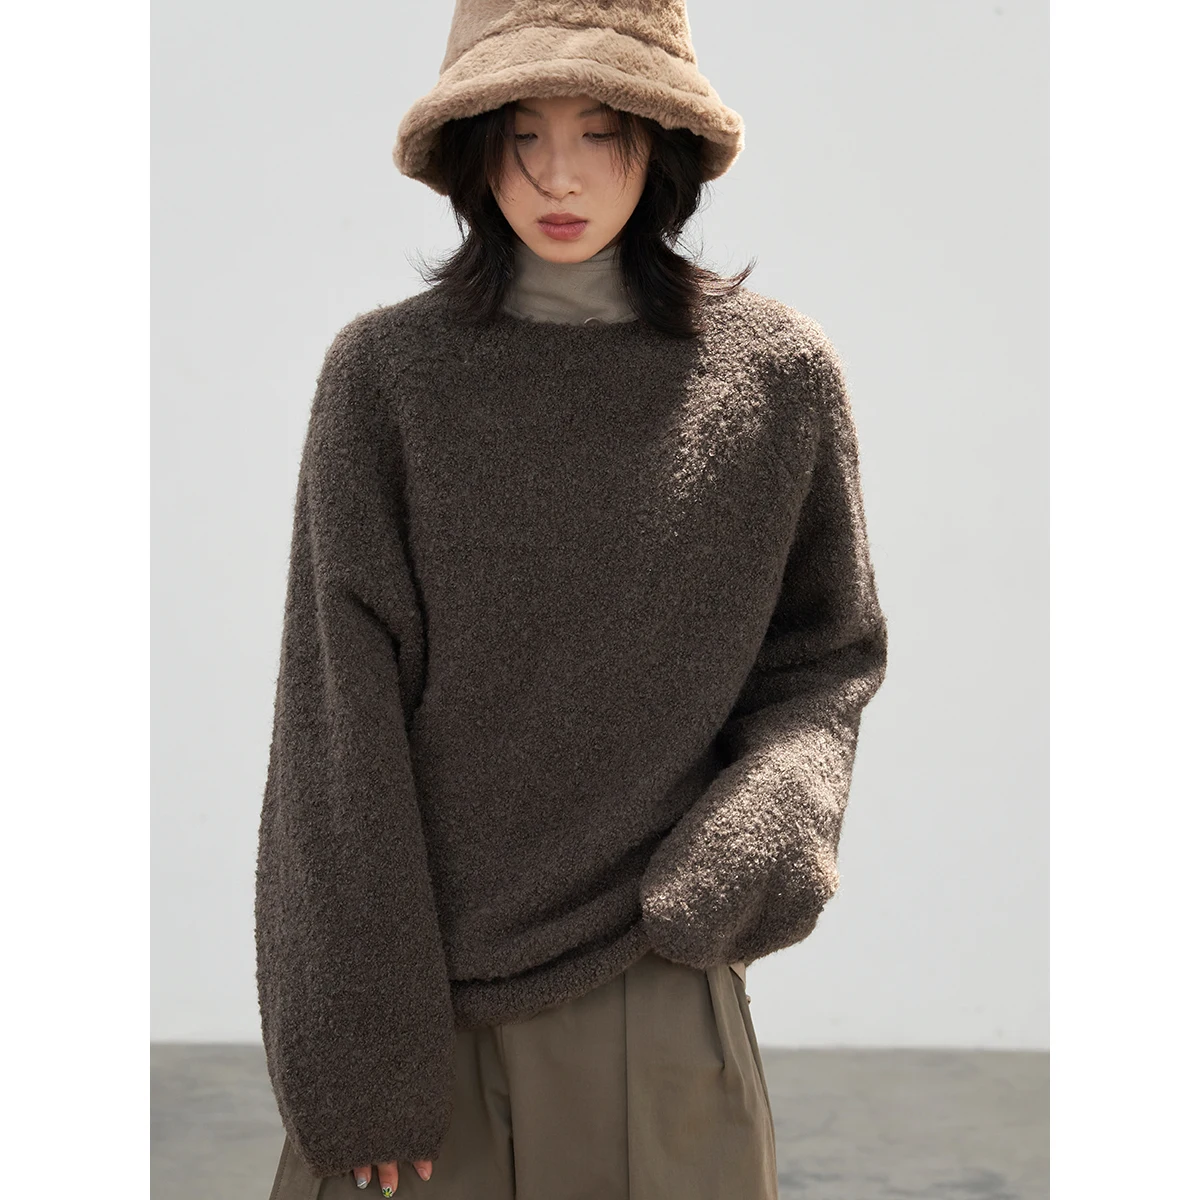 CHIC VEN Korean Women's Sweater Loose Casual Long Sleeved Coat Knitted Jumps Female Pullovers Lady Tops Autumn Winter 2022